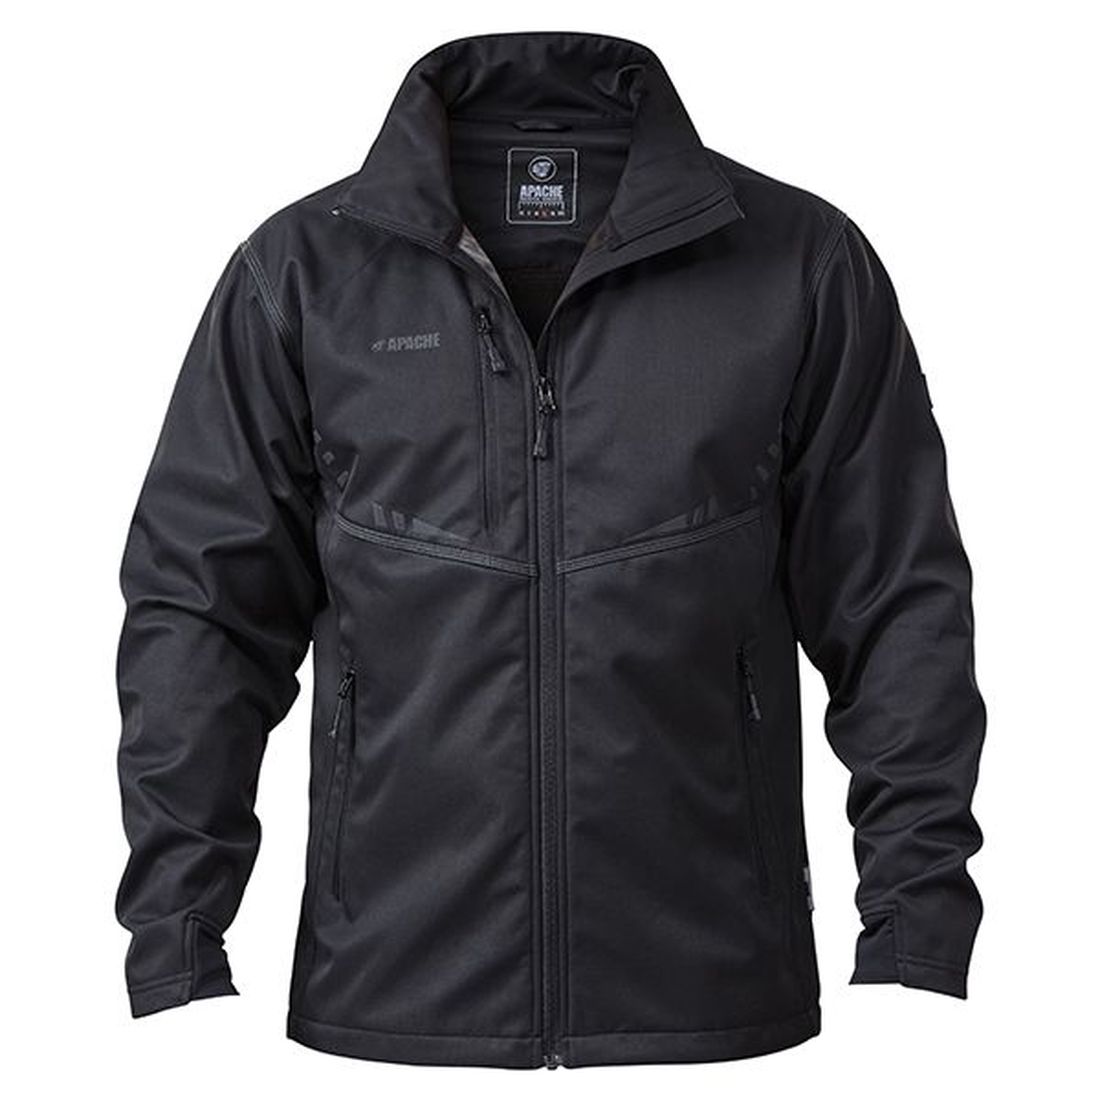 Apache ATS Lightweight Softshell Jacket - L (46in)                                     